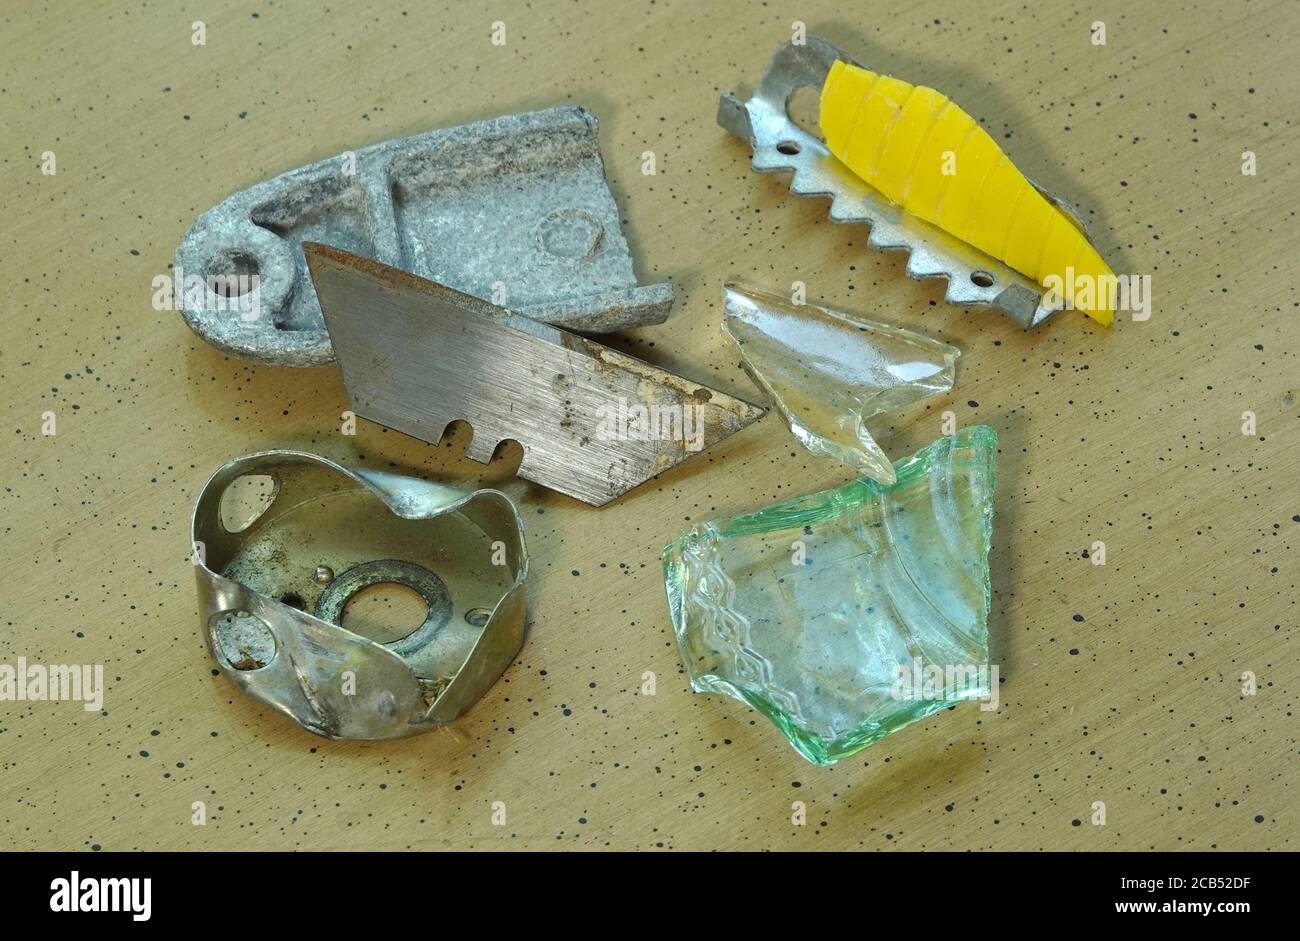 Various sharp objects used for self harm, found in a teen's room. Stock Photo